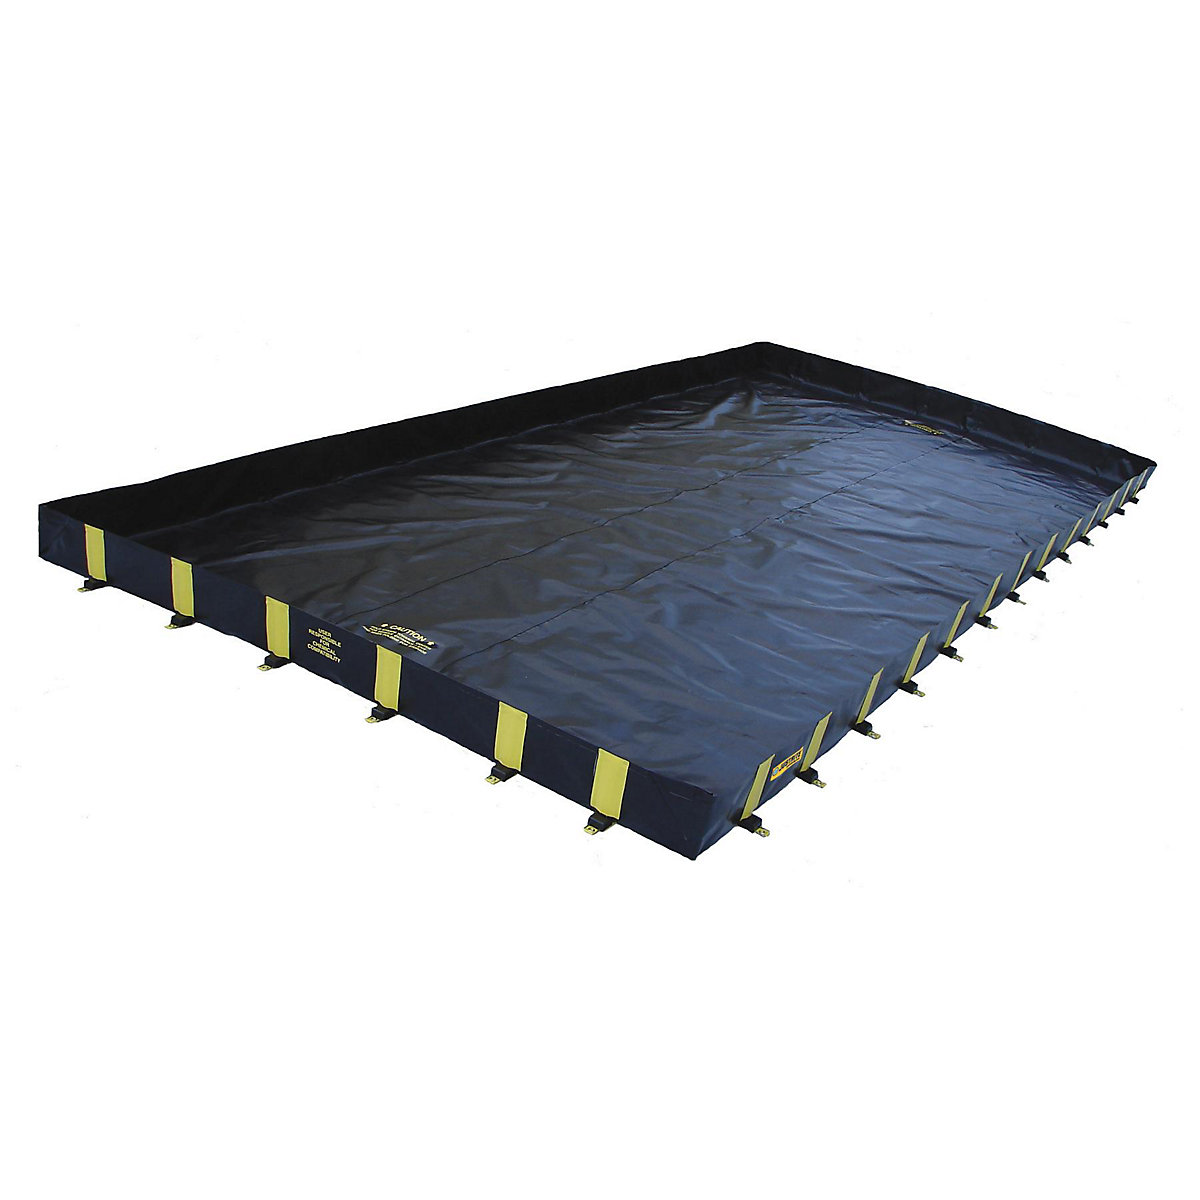 QuickBerm® XT rigid lock folding tray – Justrite, for frequent traffic, LxW 17.1 x 4.3 m-11